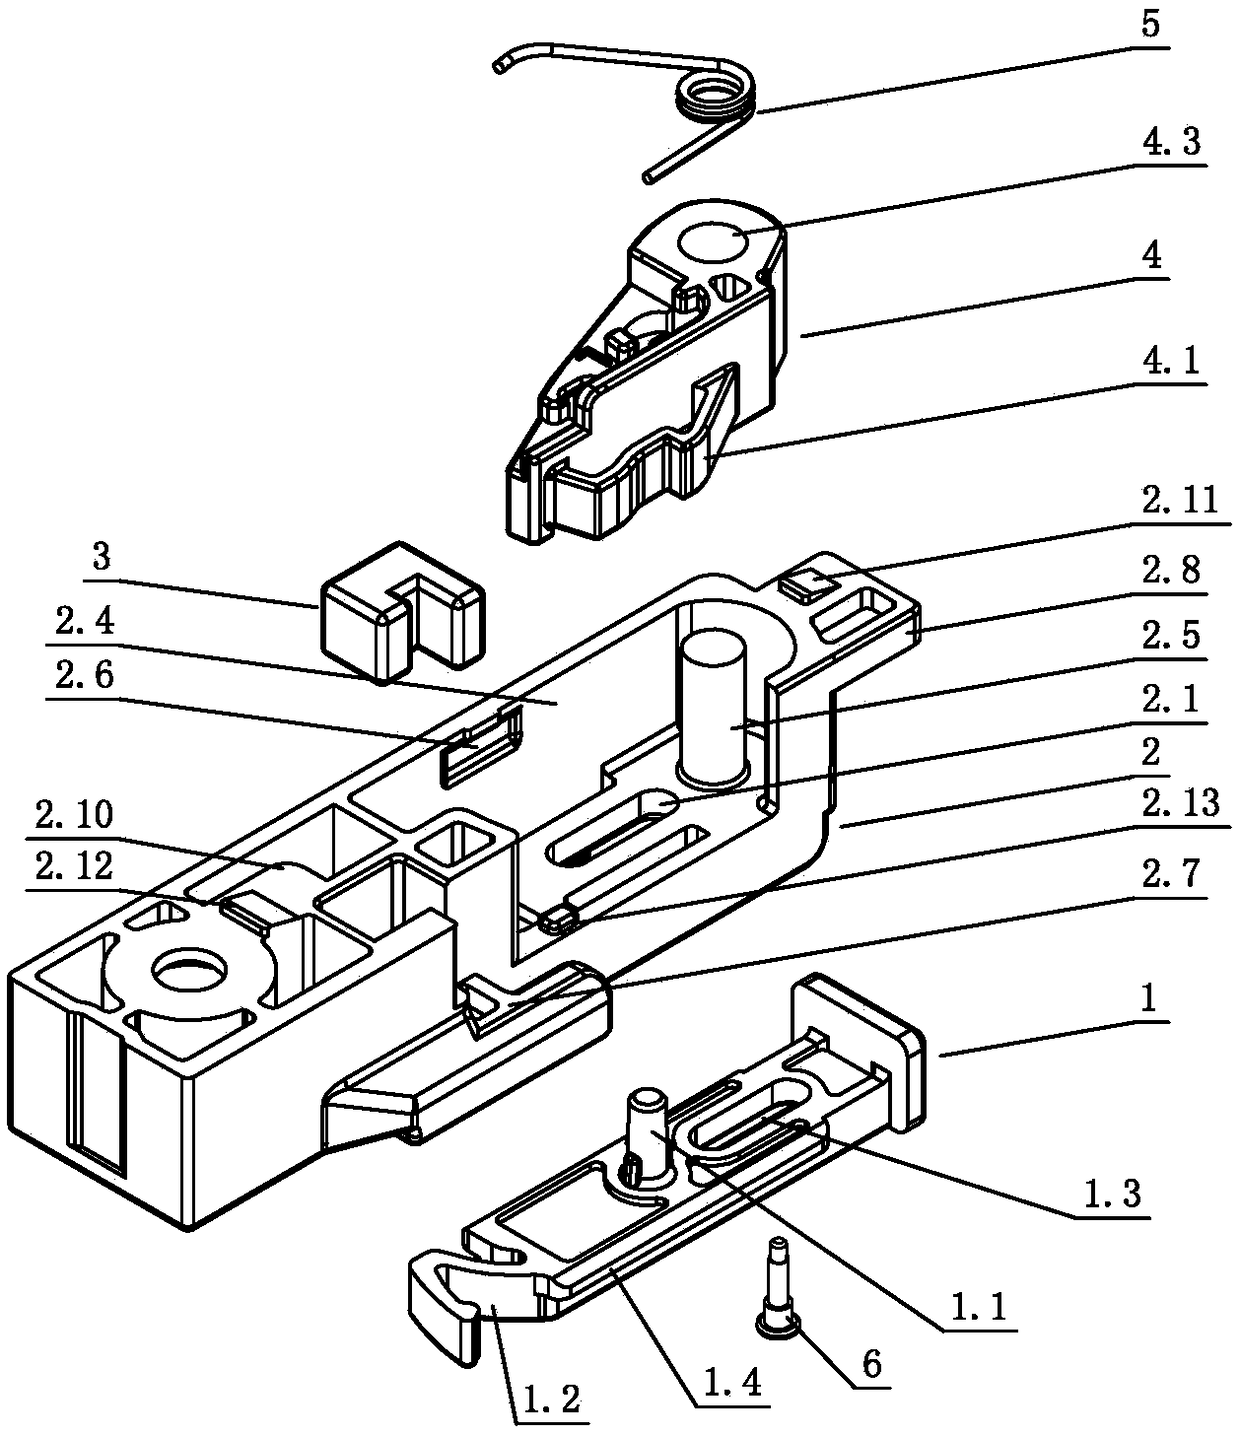 Connecting device between drawer and slide rail